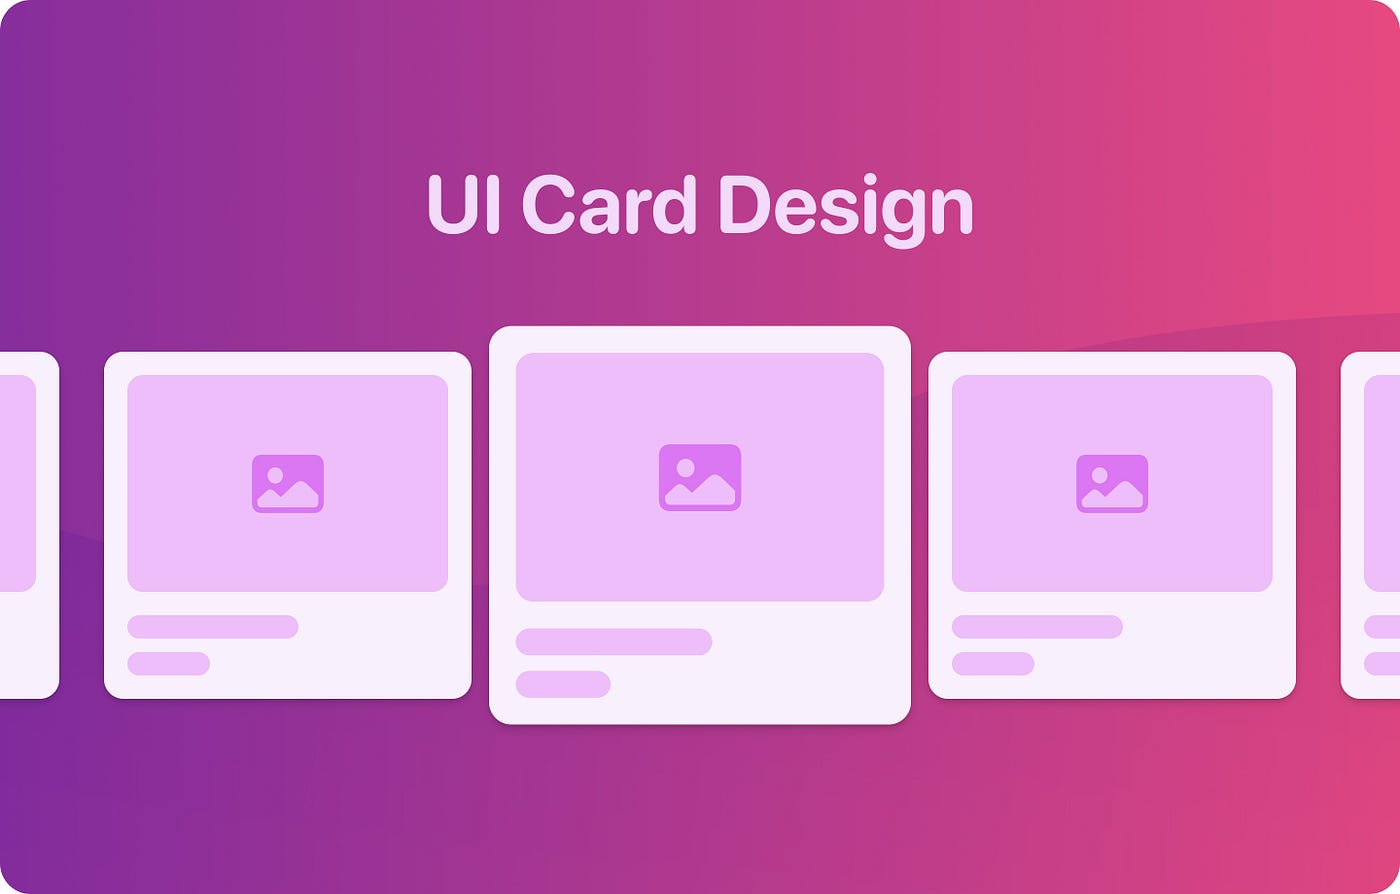 10 Card Interactions That Will Help You Get the Most Out of Your